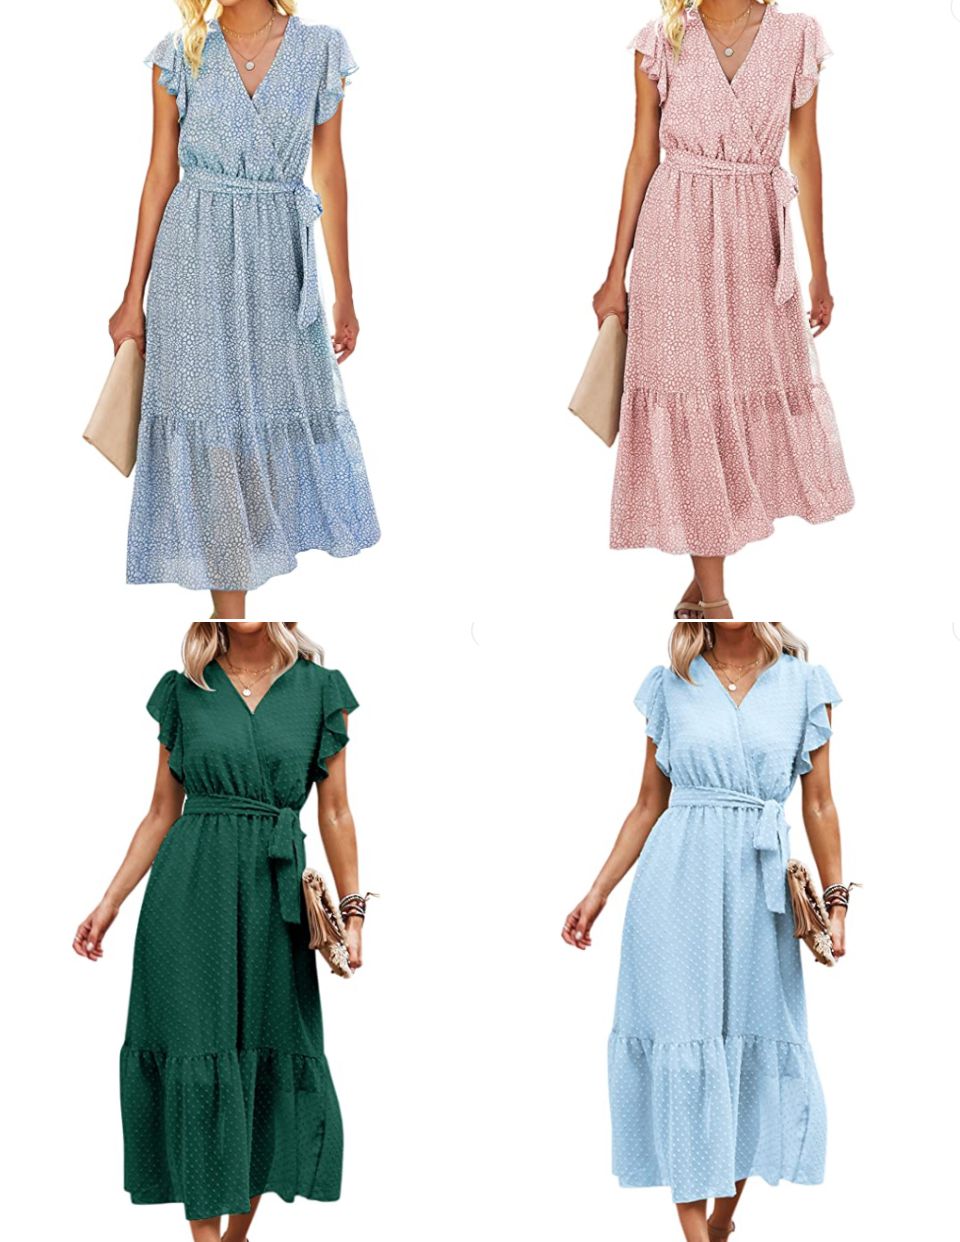 Collage of long Amazon dresses